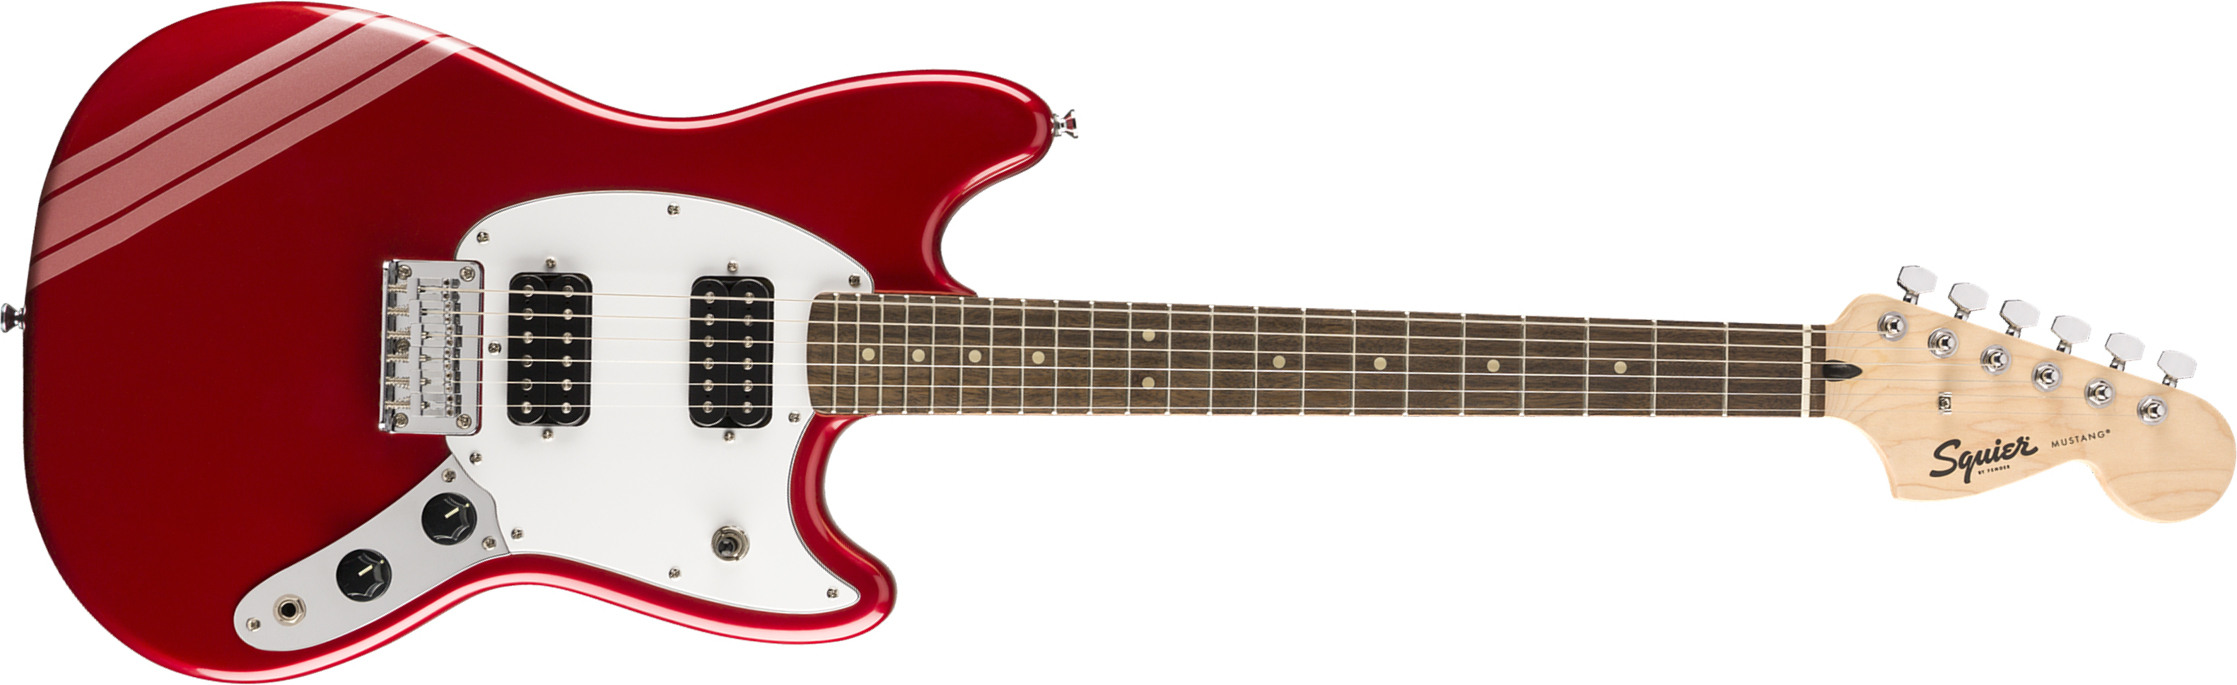 Squier Mustang Bullet Competition Hh Fsr Ht Lau - Candy Apple Red - Retro rock electric guitar - Main picture